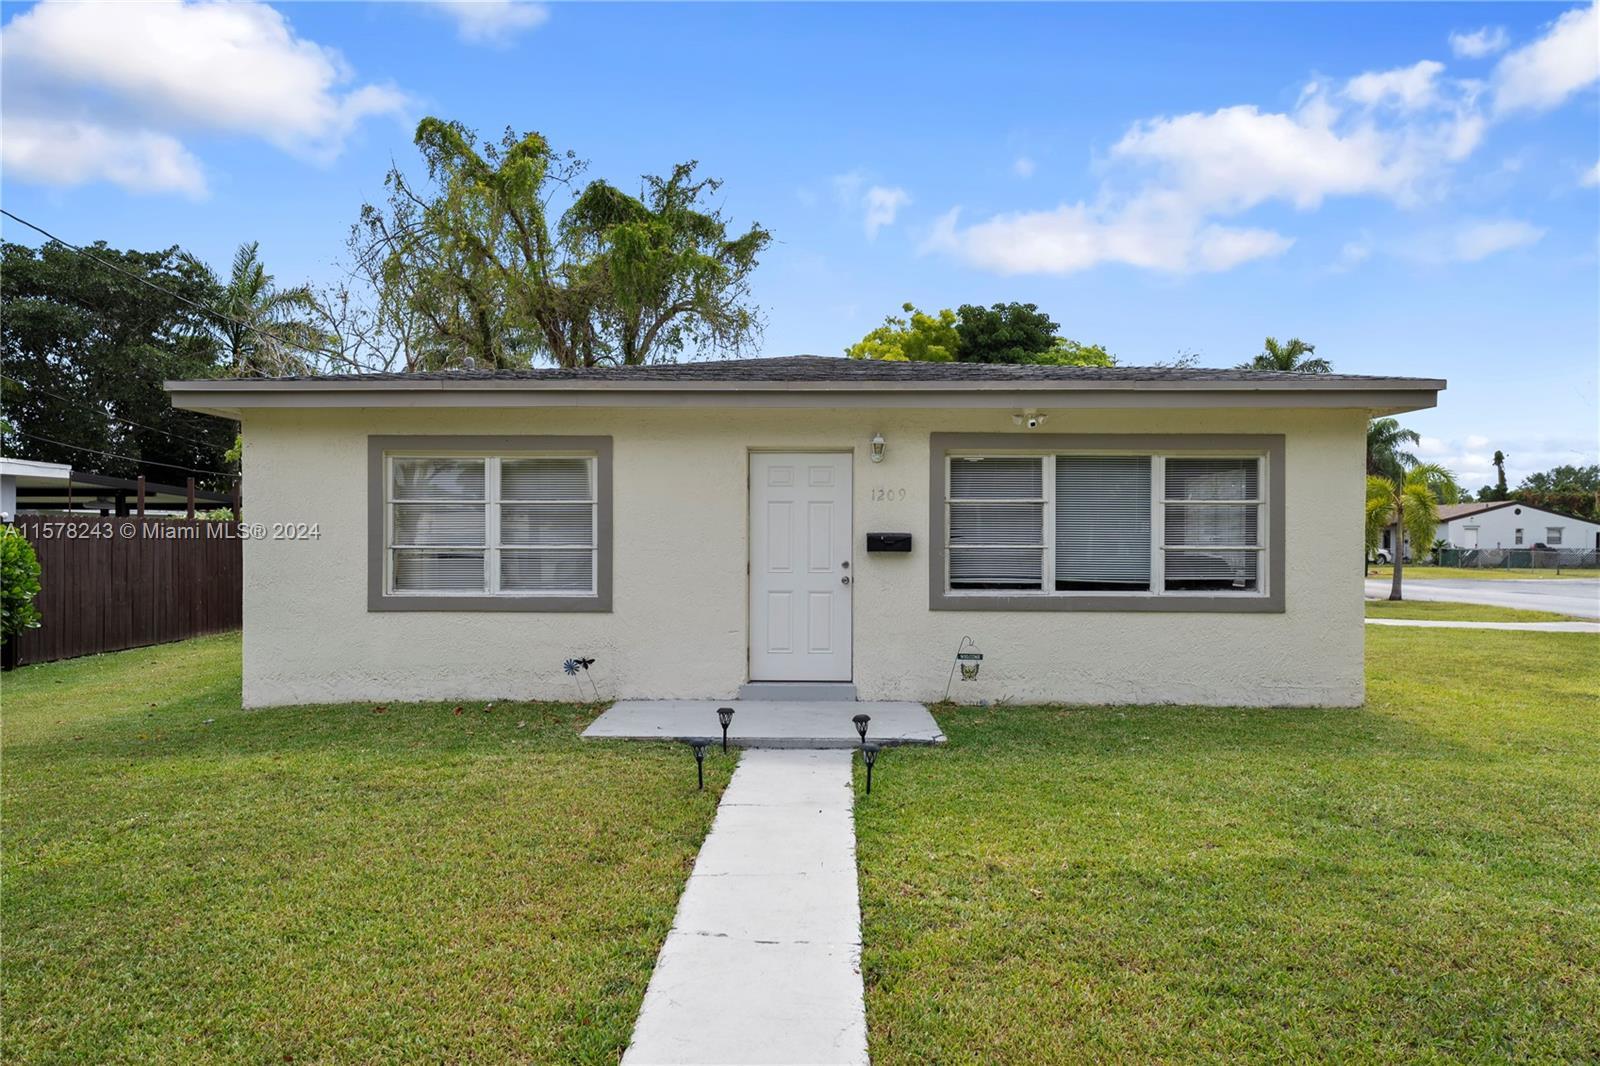 Photo of 1209 NW 1st Ave in Homestead, FL